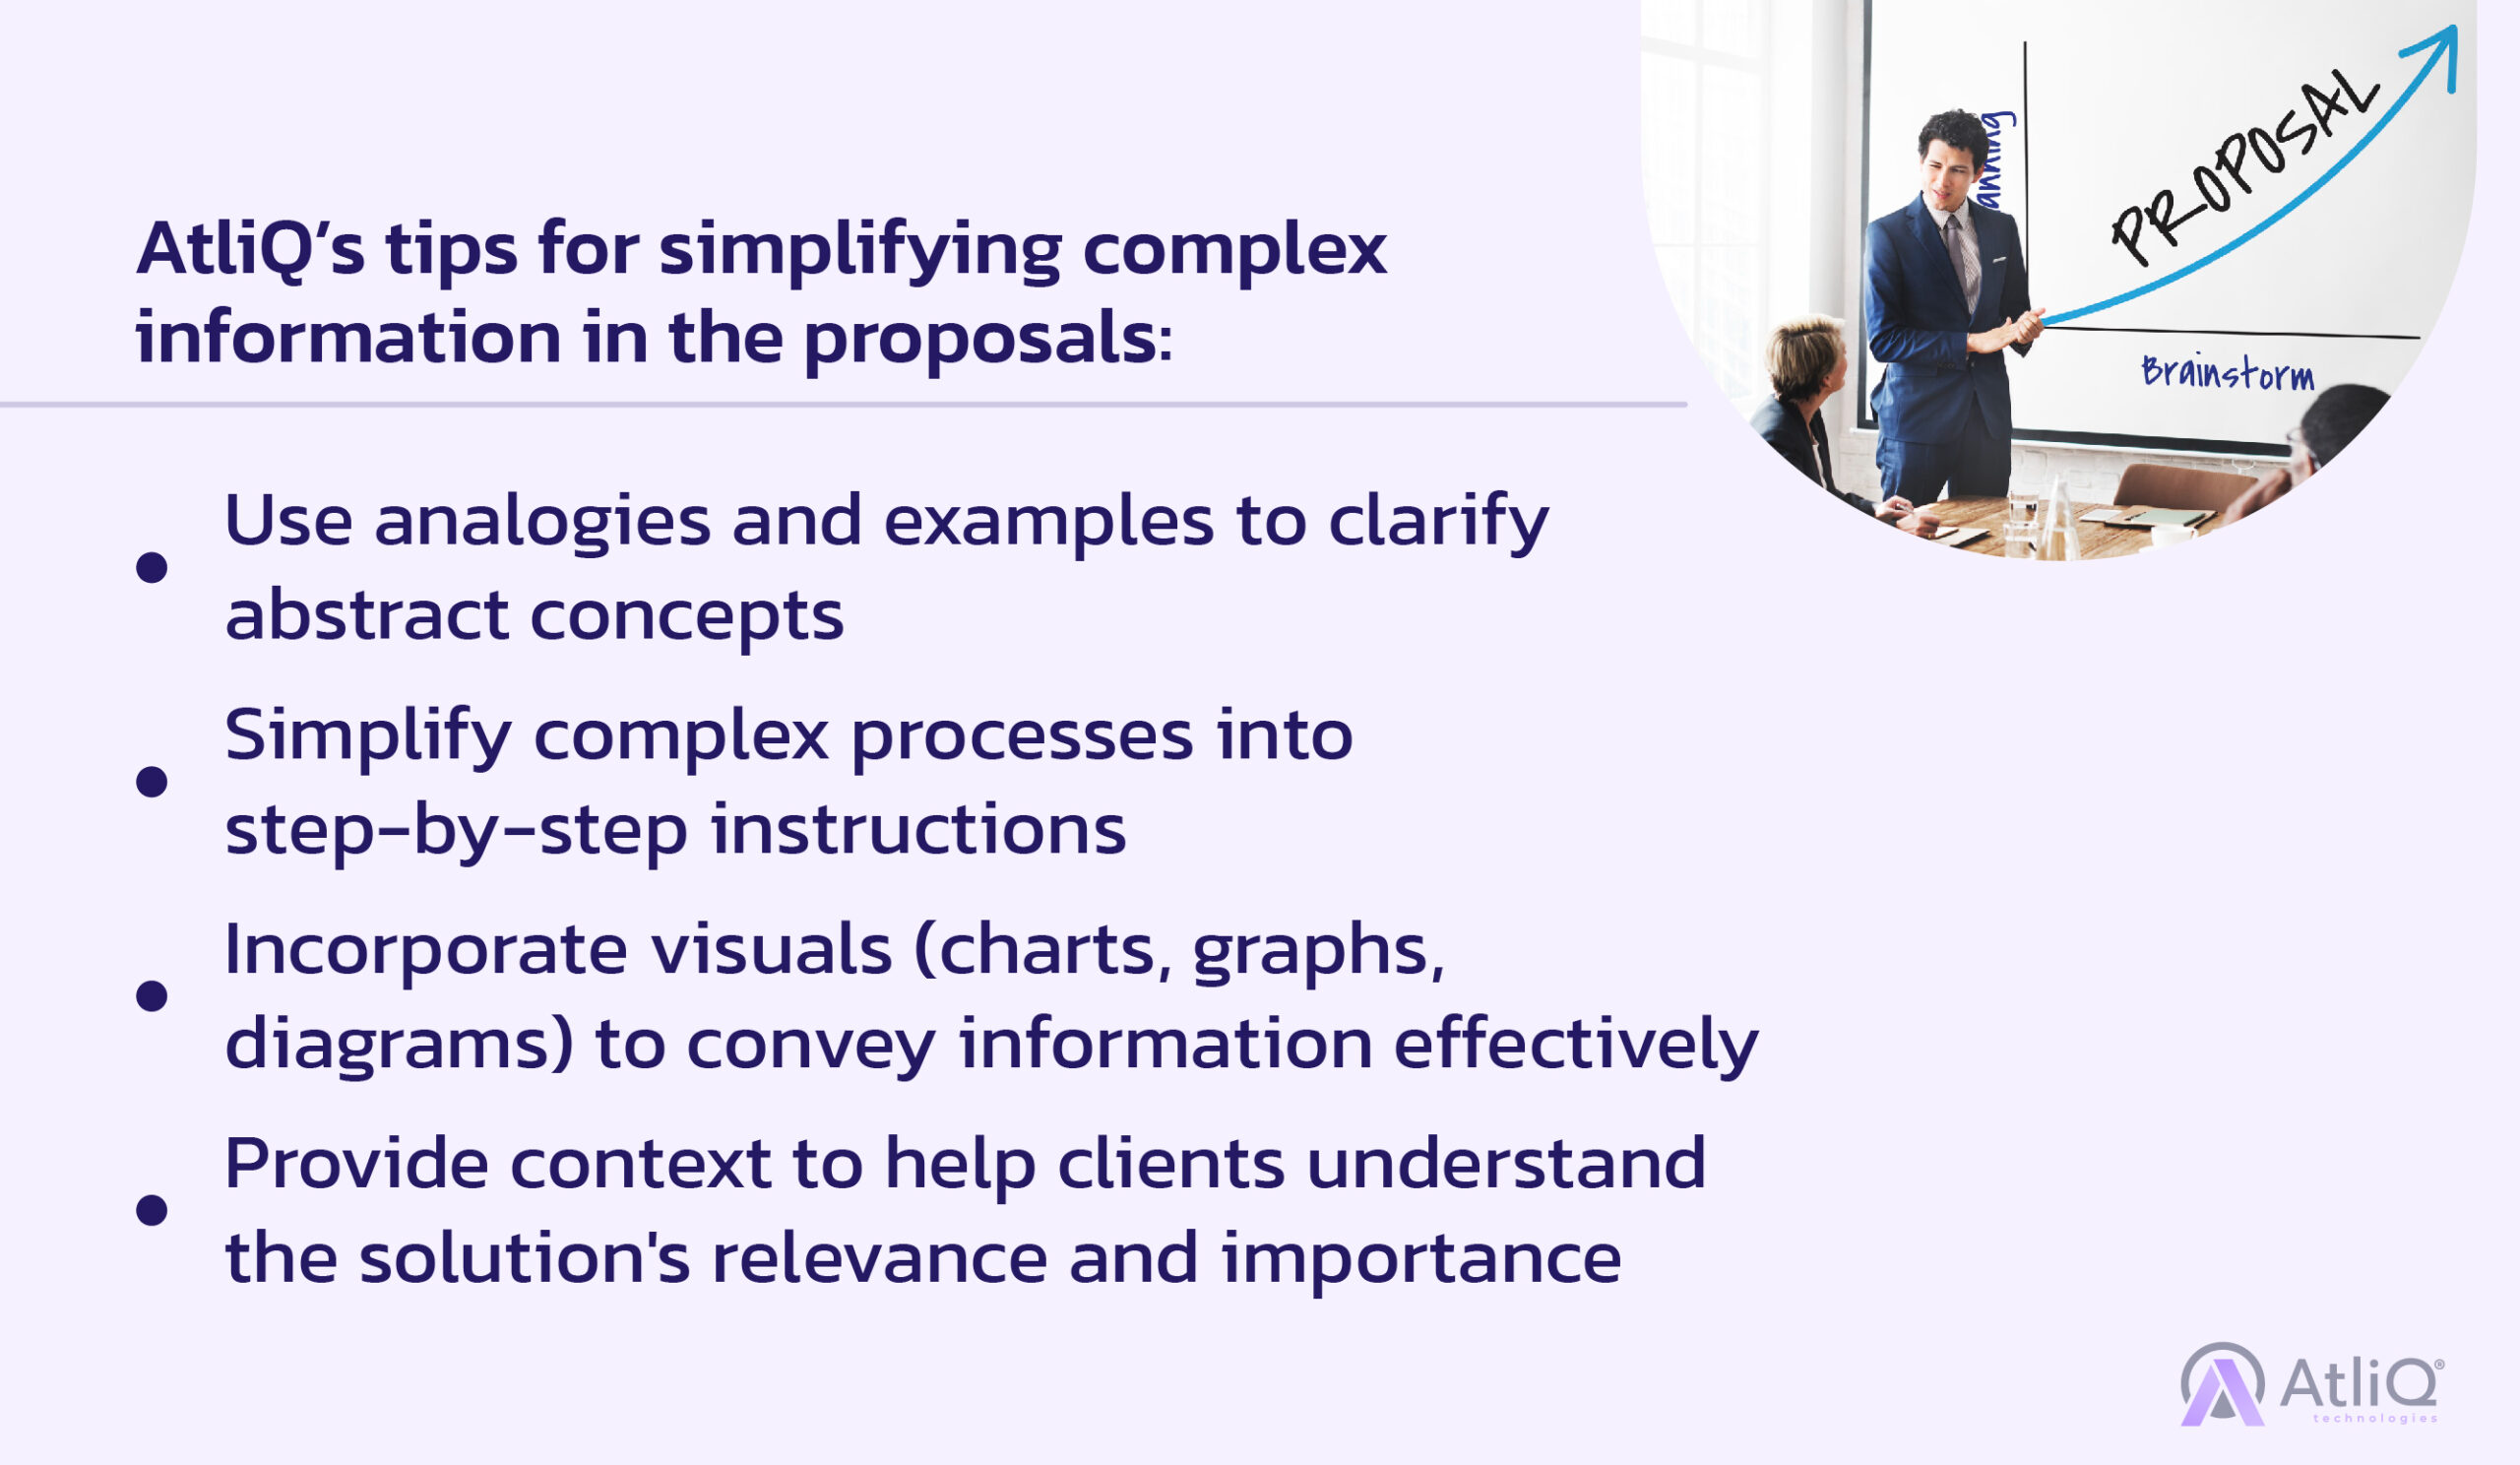 AtliQ’s tips for simplifying complex information in the proposals